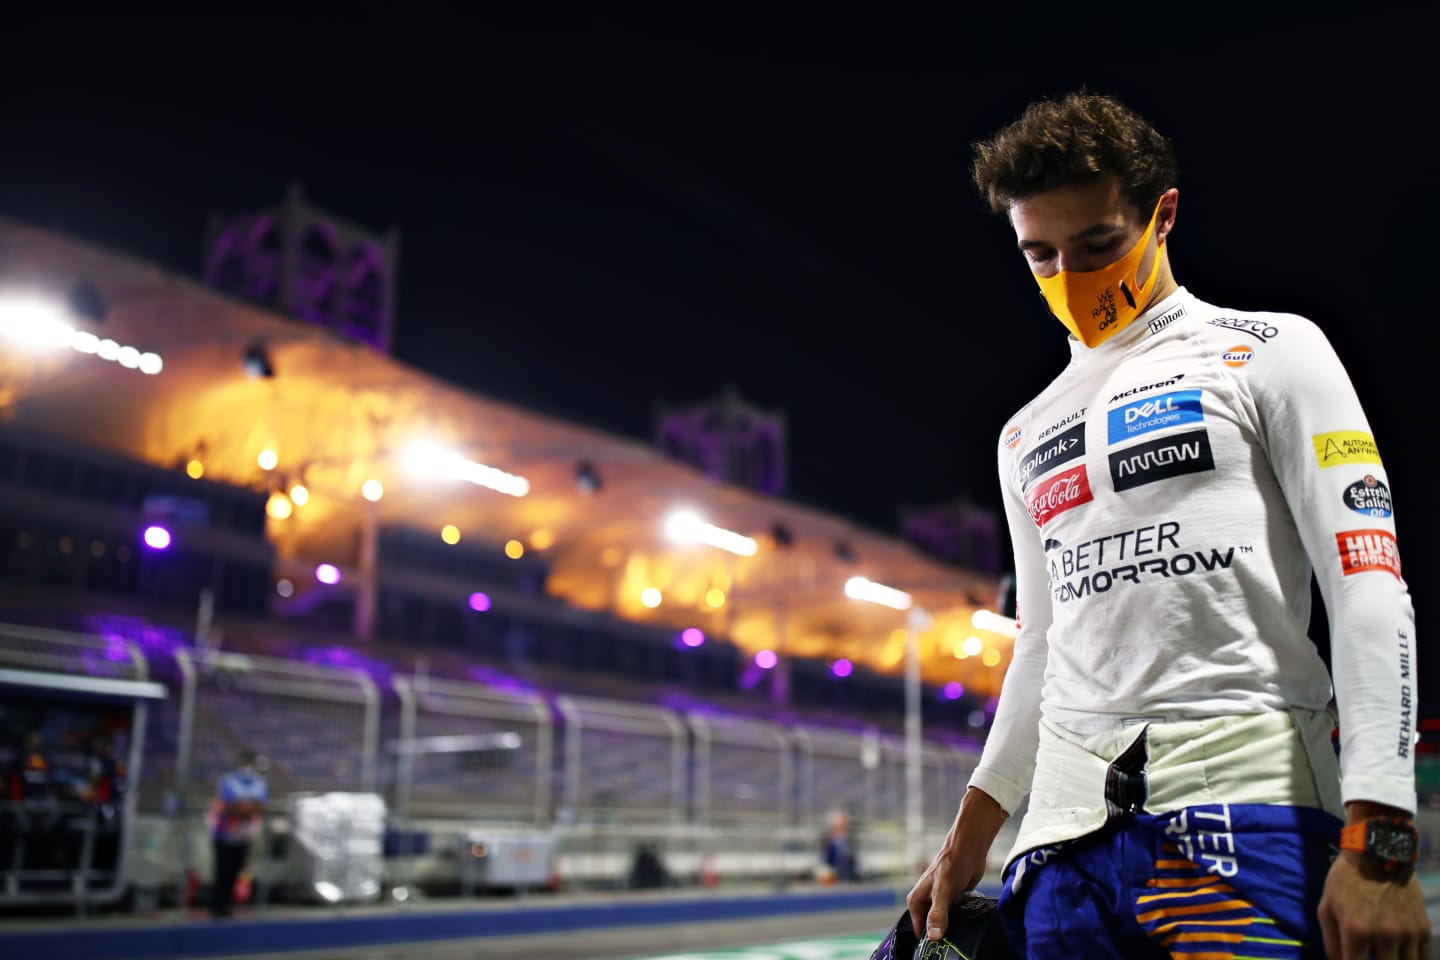 BAHRAIN, BAHRAIN - DECEMBER 05: Lando Norris of Great Britain and McLaren F1 looks dejected in the Pitlane during qualifying ahead of the F1 Grand Prix of Sakhir at Bahrain International Circuit on December 05, 2020 in Bahrain, Bahrain. (Photo by Mark Thompson/Getty Images)